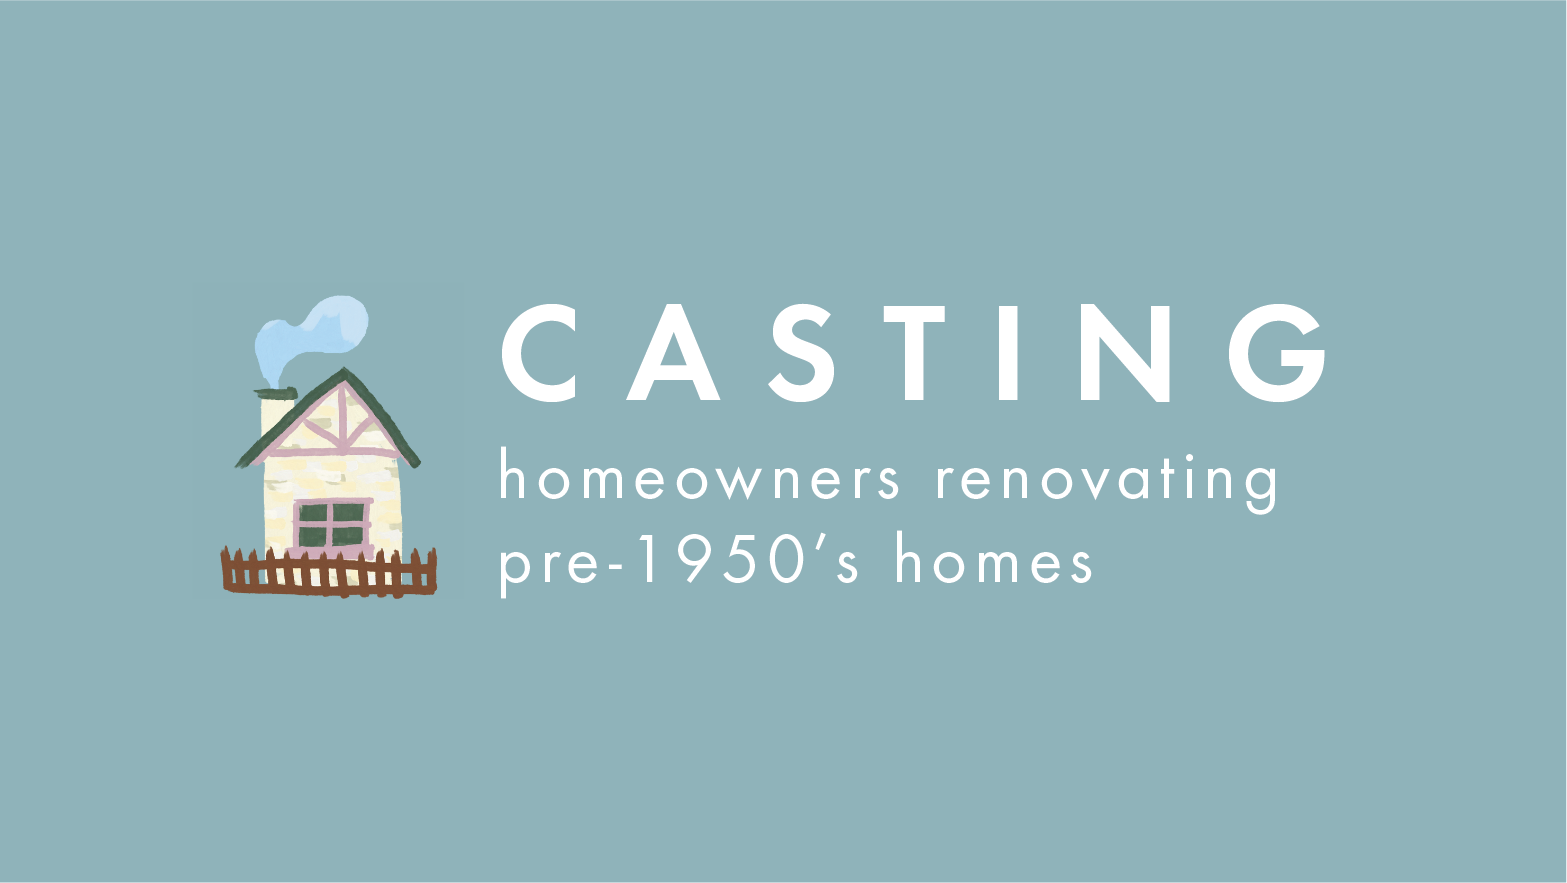 Casting homeowners renovating pre-1950s homes